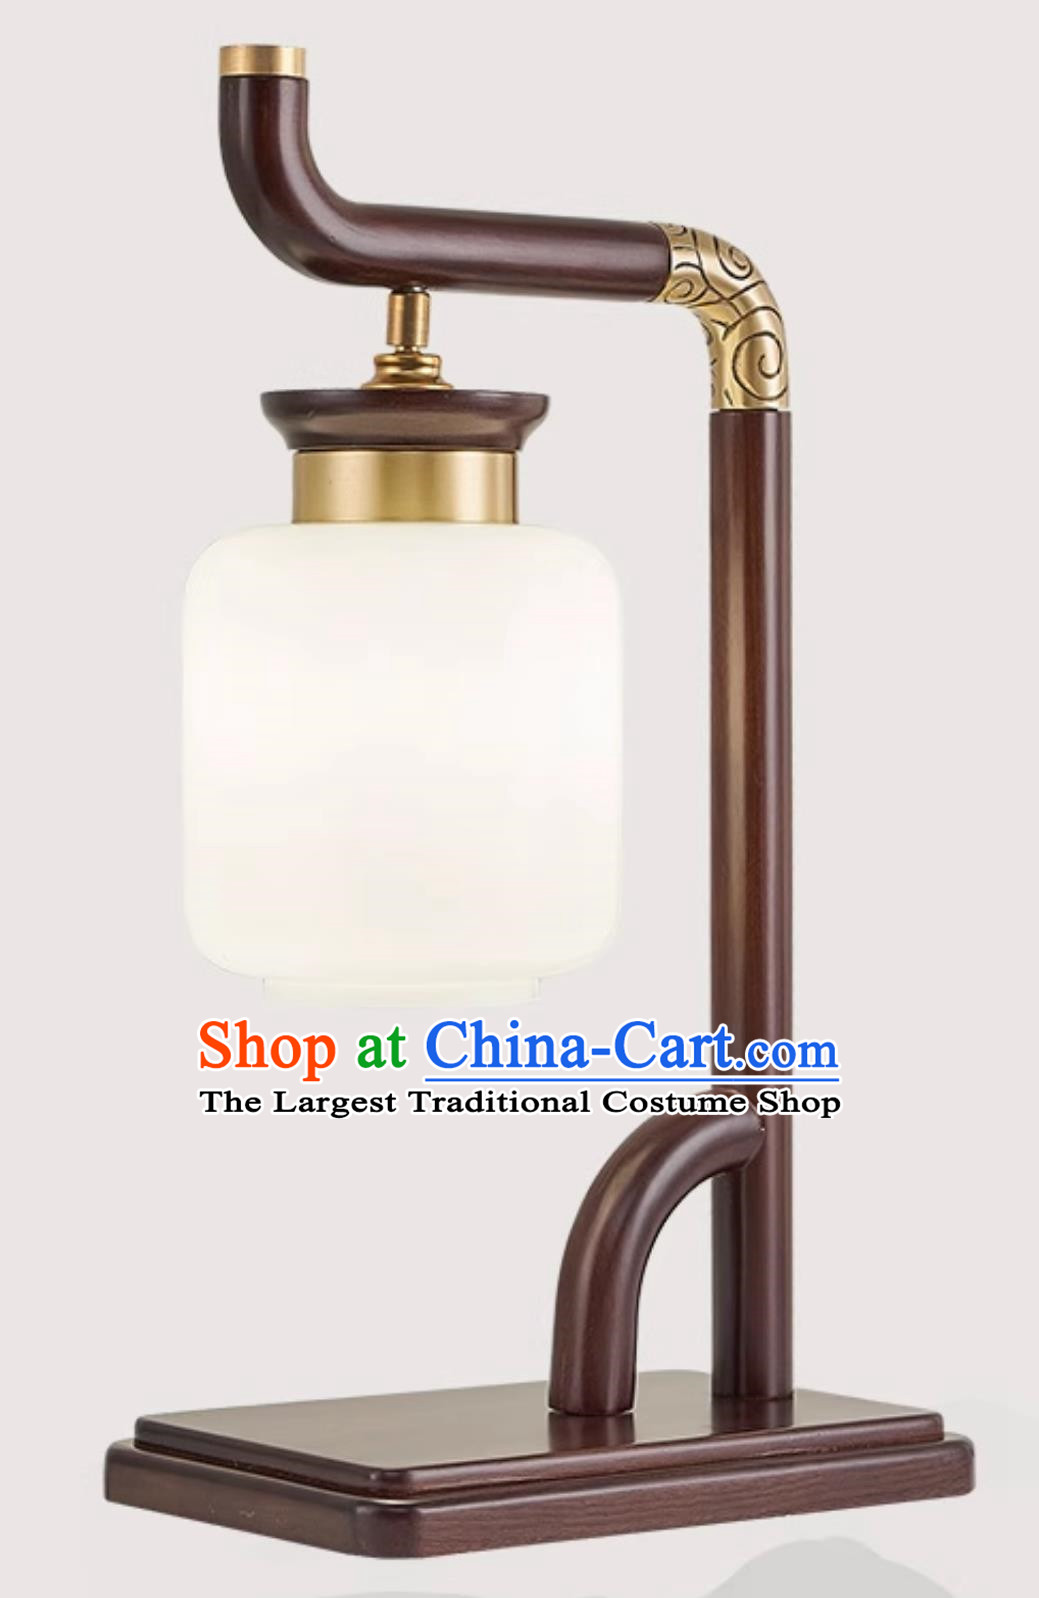 20 Inches Chinese Style Table Lamp Study Tea Room Bedroom Bedside Lamp Chinese Style Antique All Copper Solid Wood Lamp